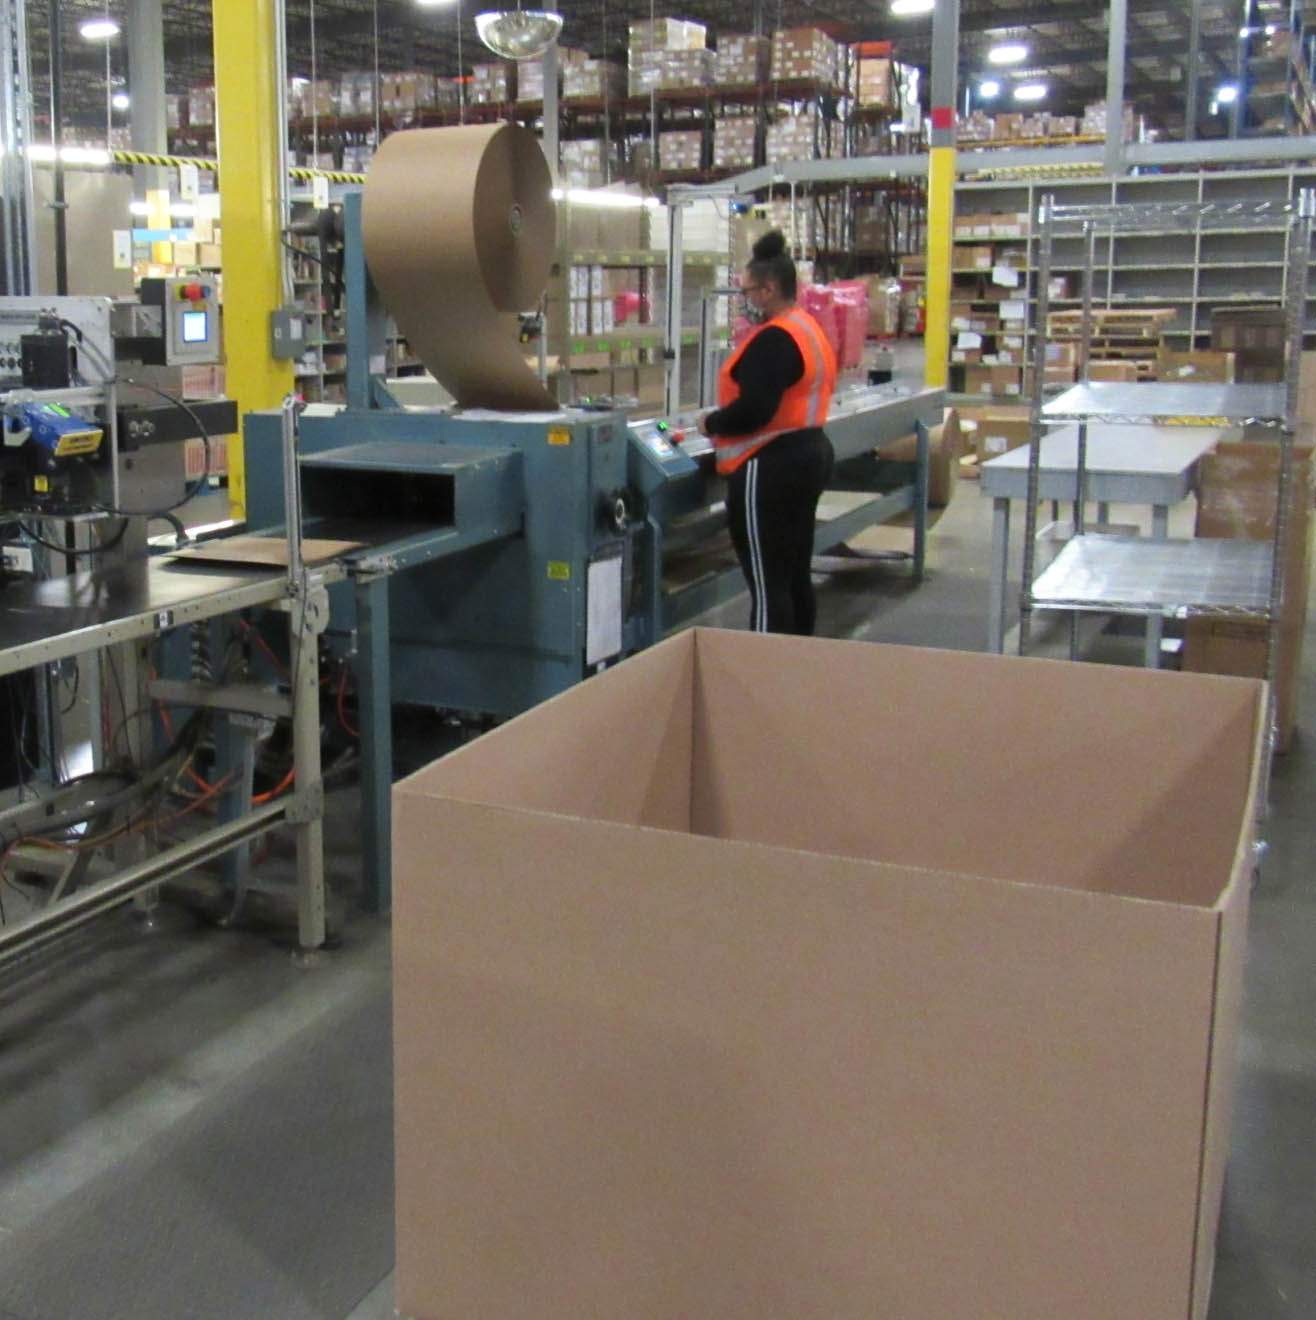 Employees prepare cardboard boxes in preparation for shipping